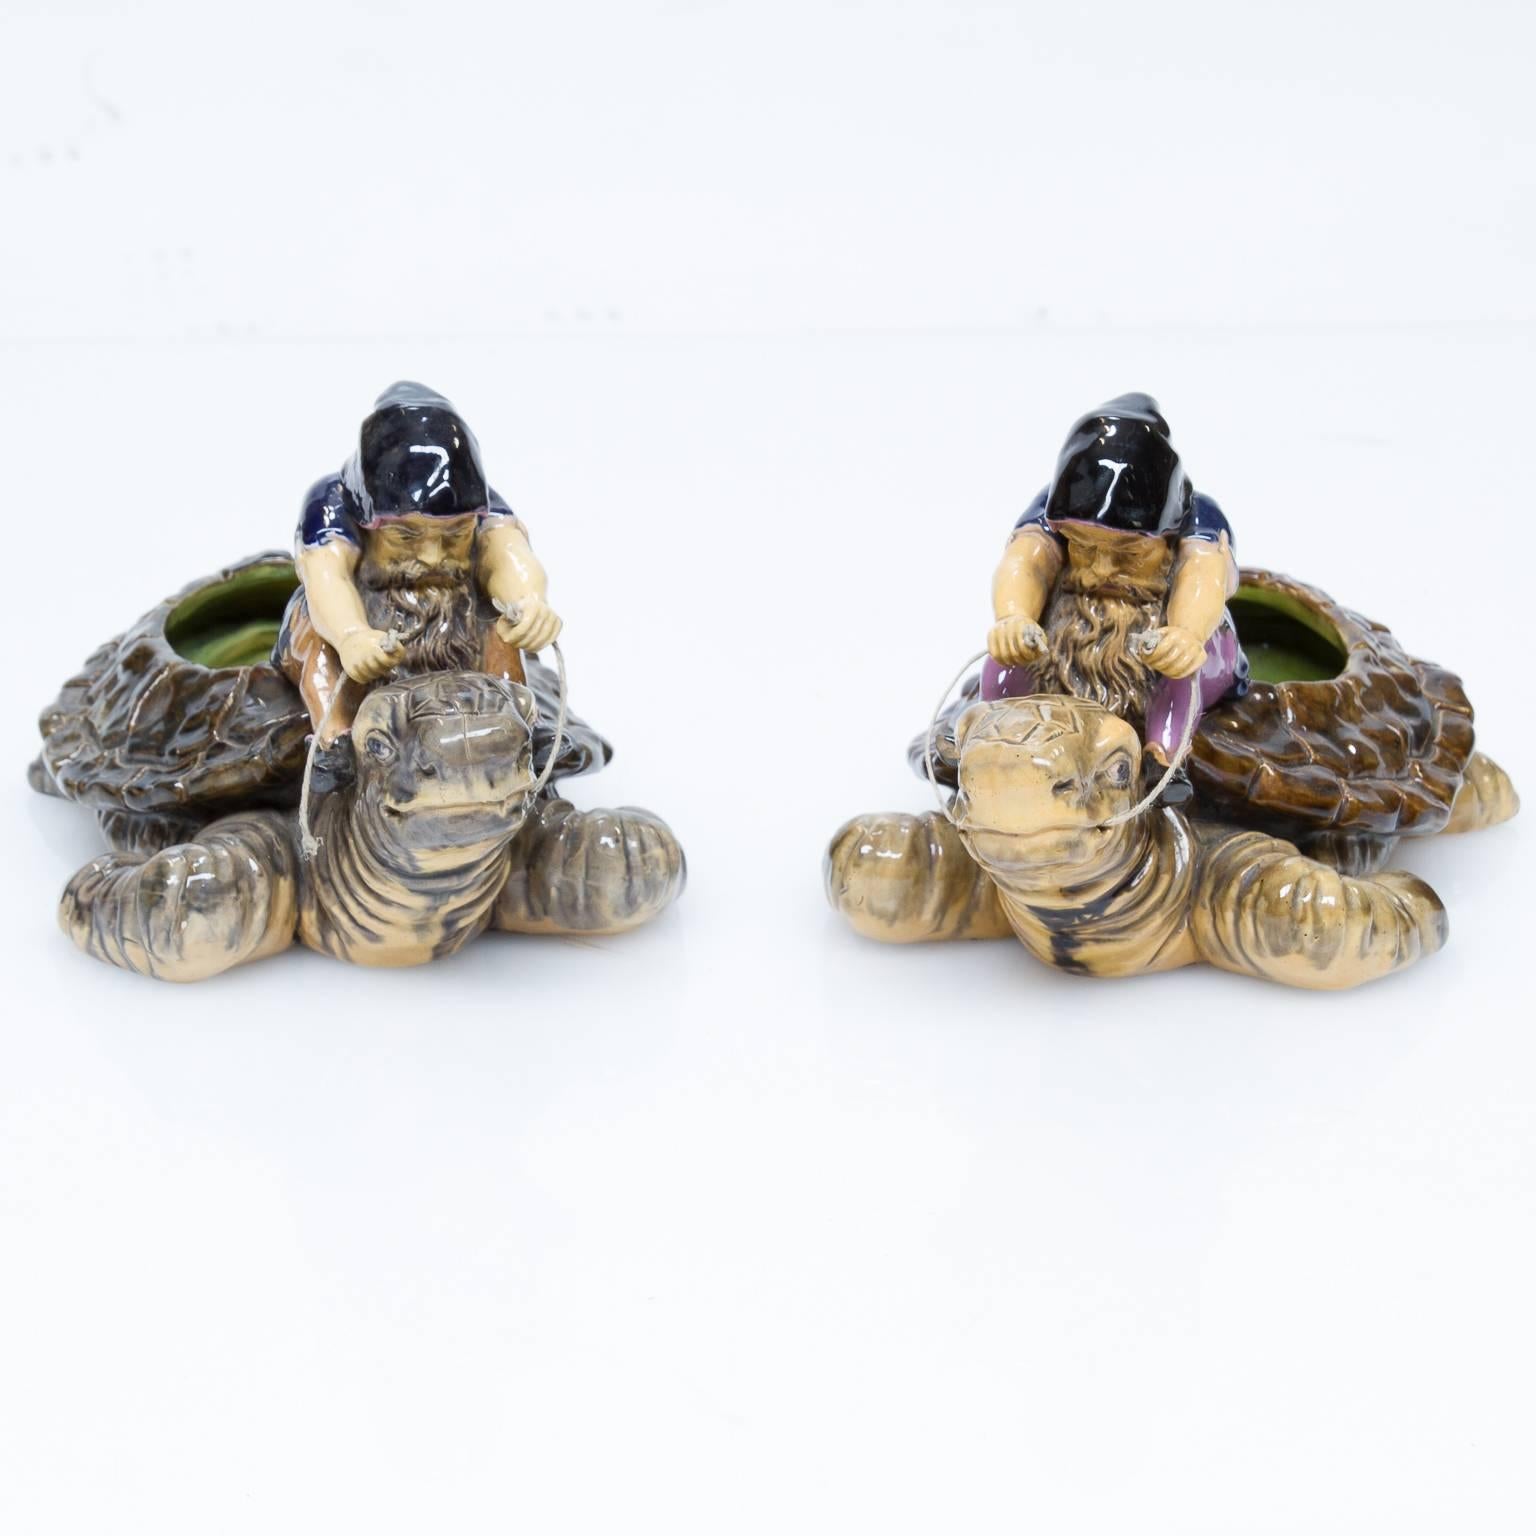 Vintage Majolica Goblin's riding a turtle.
This pair are not matching per say but to put two together as pair, difficult. Here we have collectable Majolica figures. We have added the string. We left one pulled away to show the removability of the